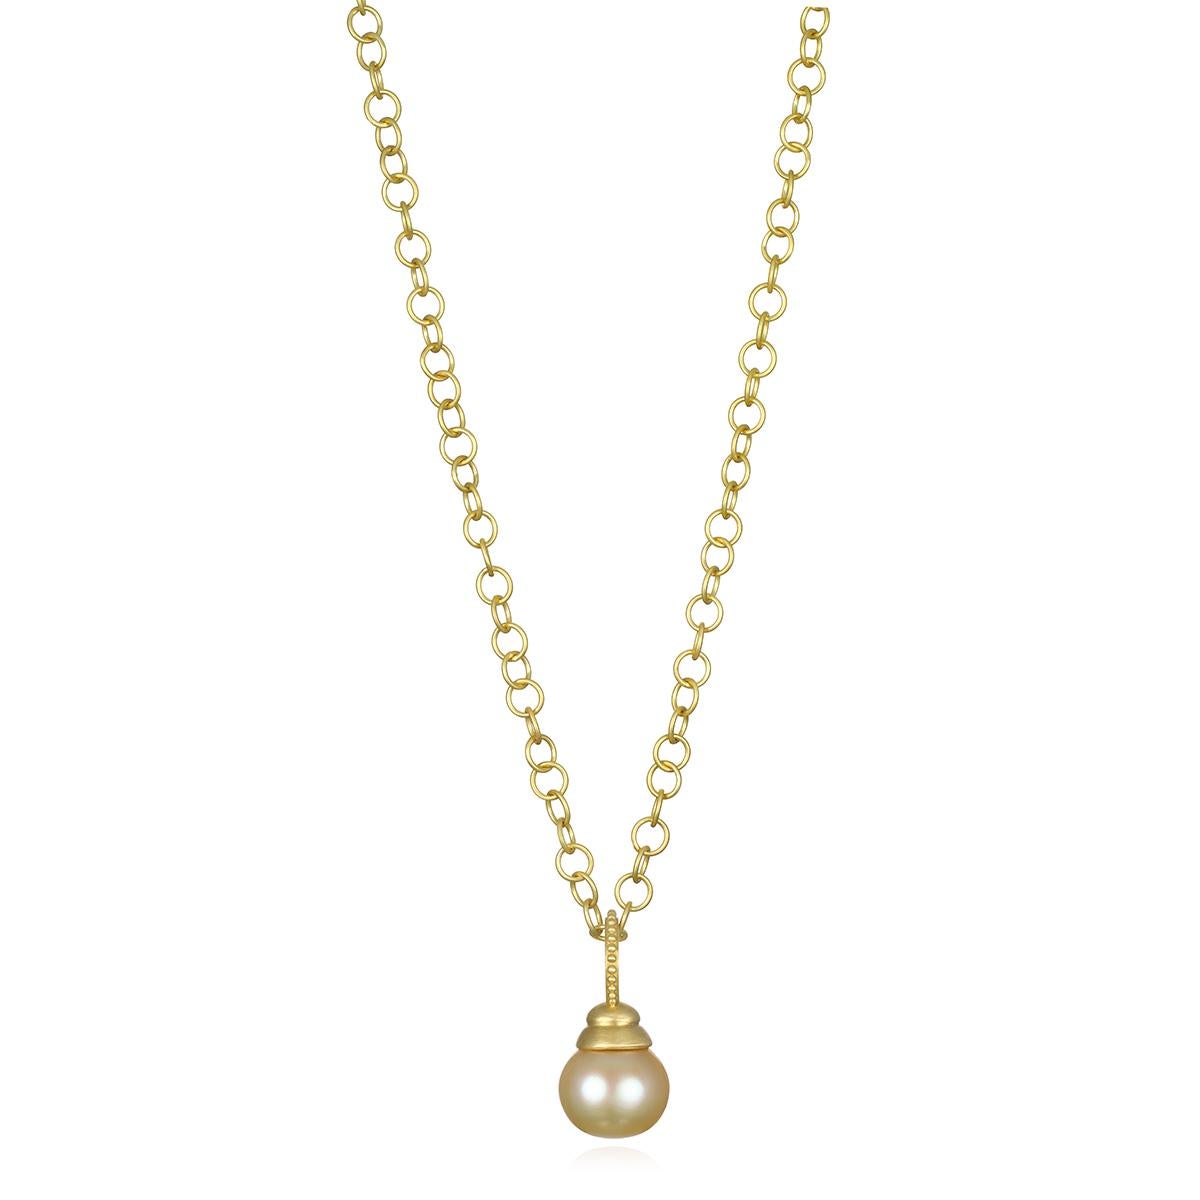 Faye Kim's chic 18 Karat Gold Round Link Chain is classic and timeless yet modern...ideal for wearing alone, with a pendant or charms, or layered with other necklaces and chains.

Chain 24